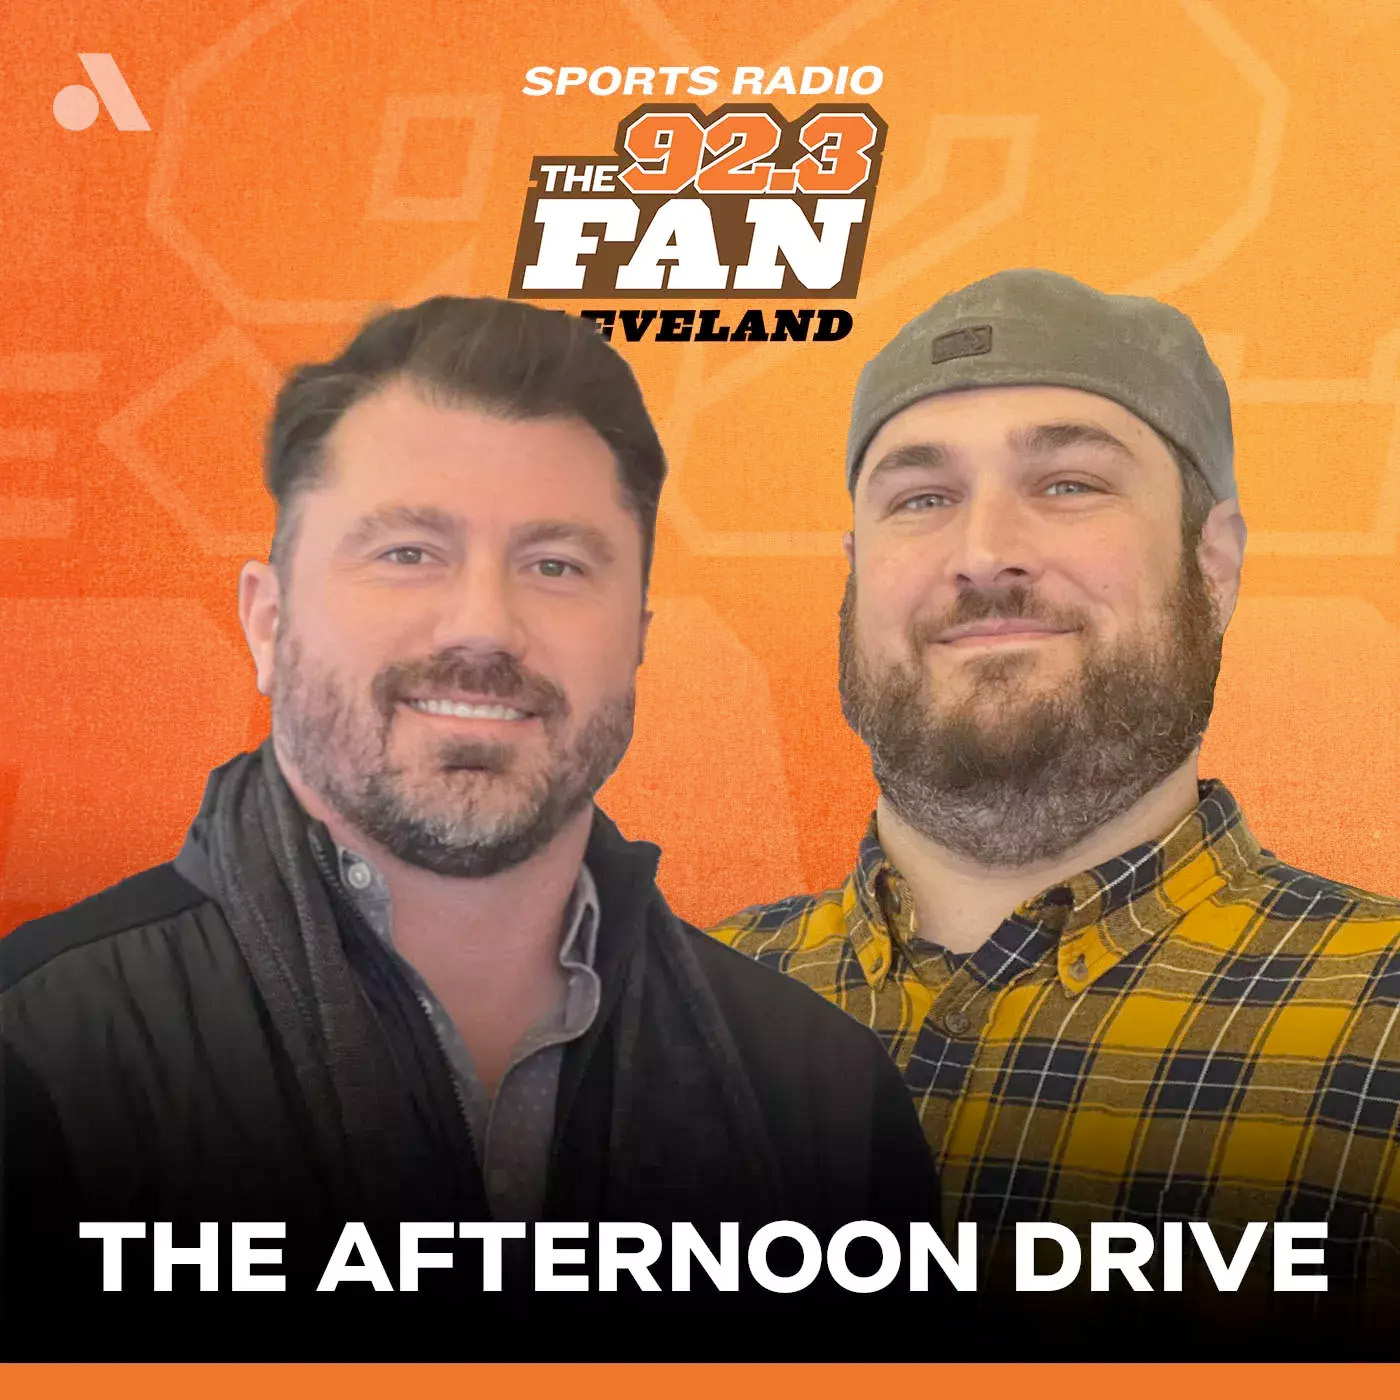 Bull & Fox With Daryl Ruiter - Recap Browns Win Over Ravens, Schedule Ahead